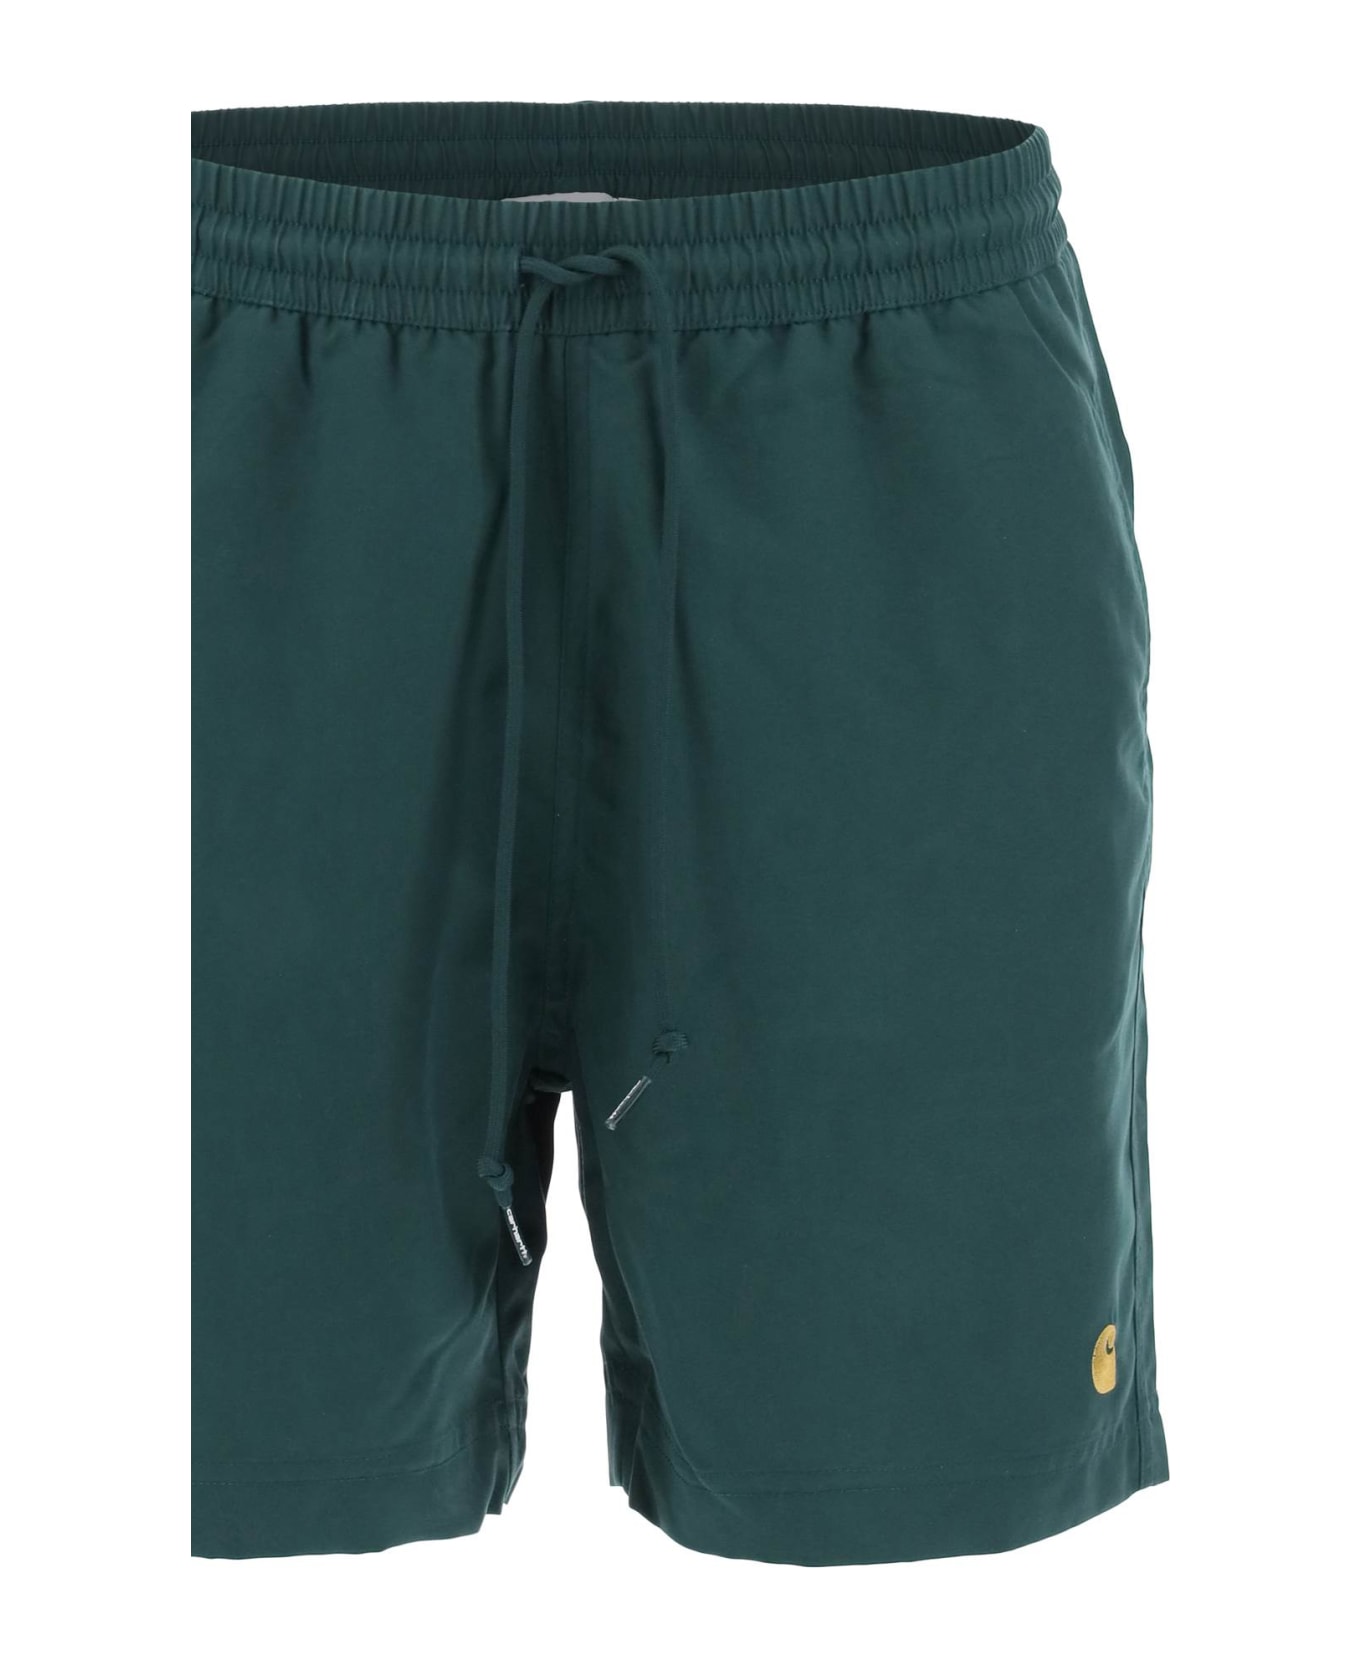 Carhartt Chase Swim Trunks - DISCOVERY GREEN GOLD (Green)